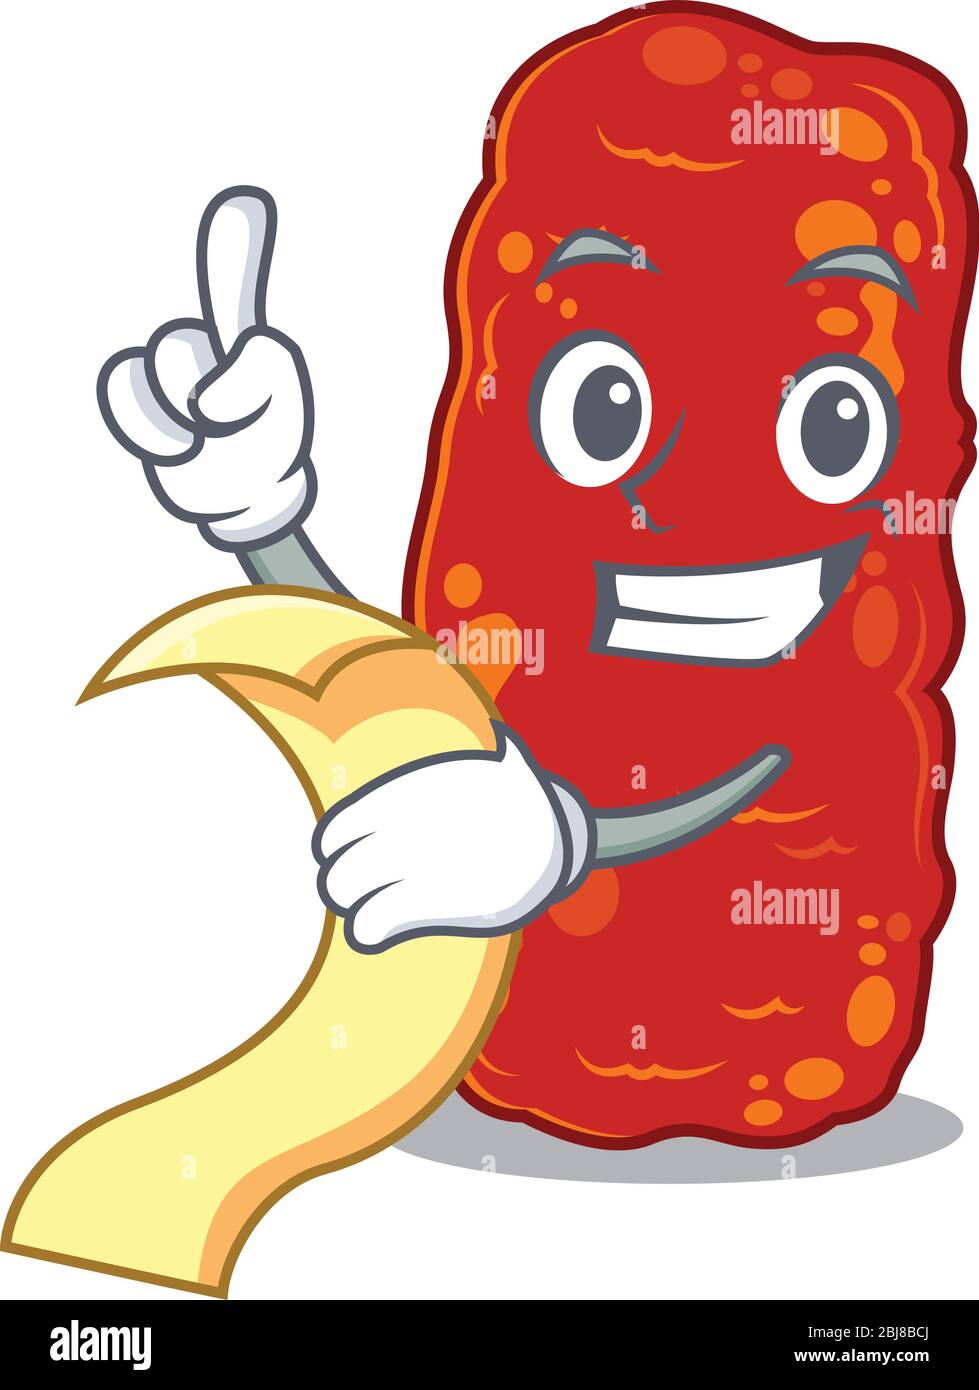 Acinetobacter bacteria mascot character design with a menu on his hand Stock Vector